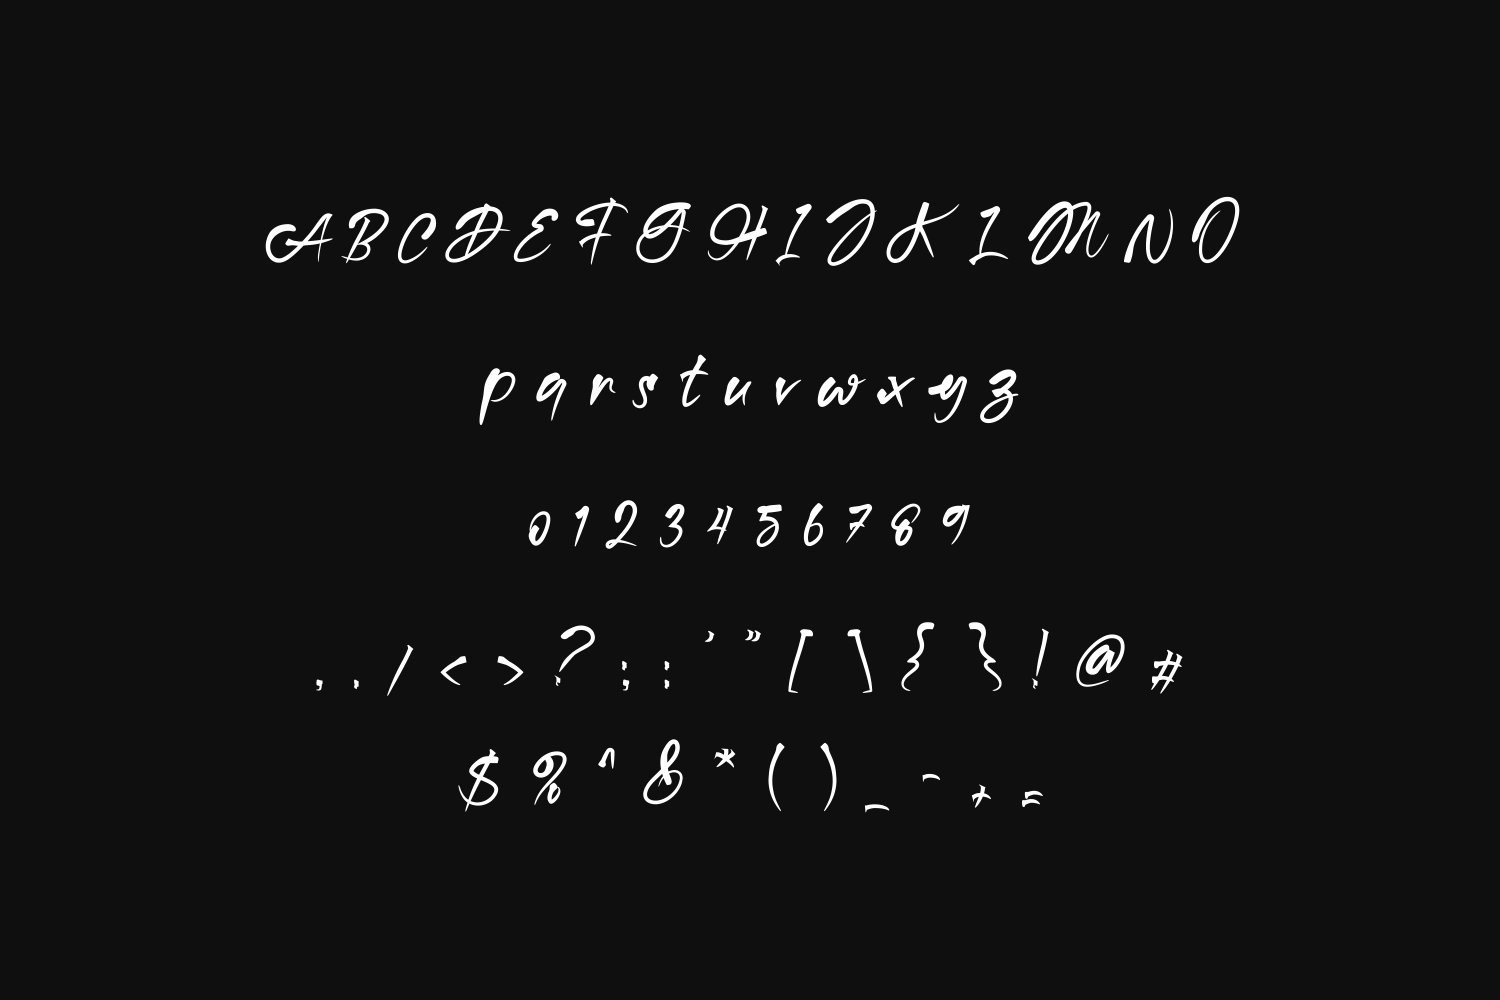 A black background with a white font and numbers.